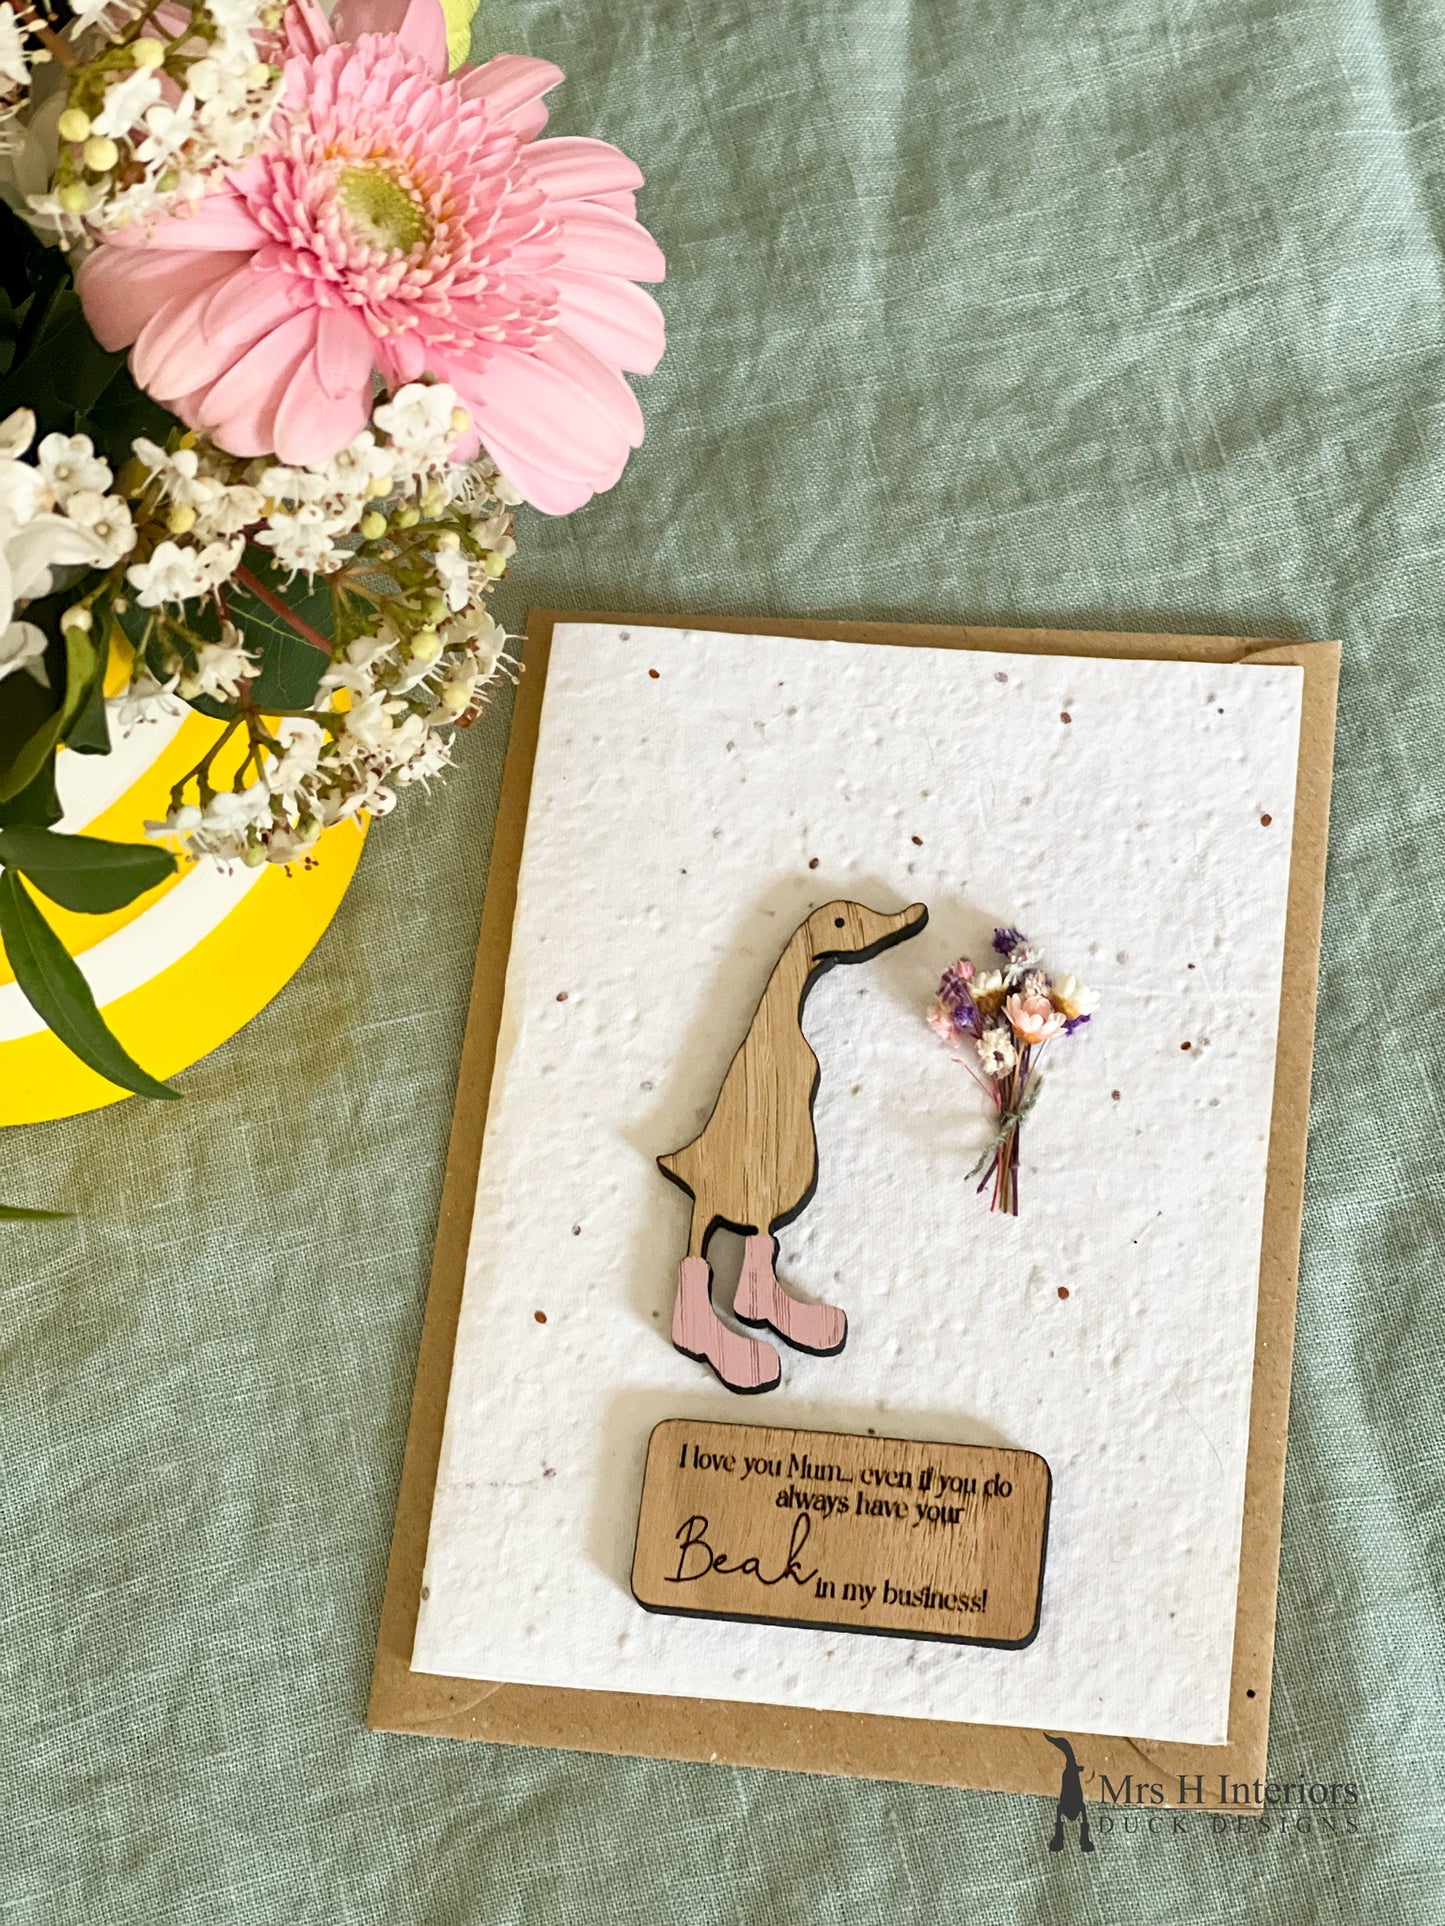 I Love You Mum... - Duck with Flowers - Mother's Day - Decorated Wooden Duck in Boots by Mrs H the Duck Lady Card